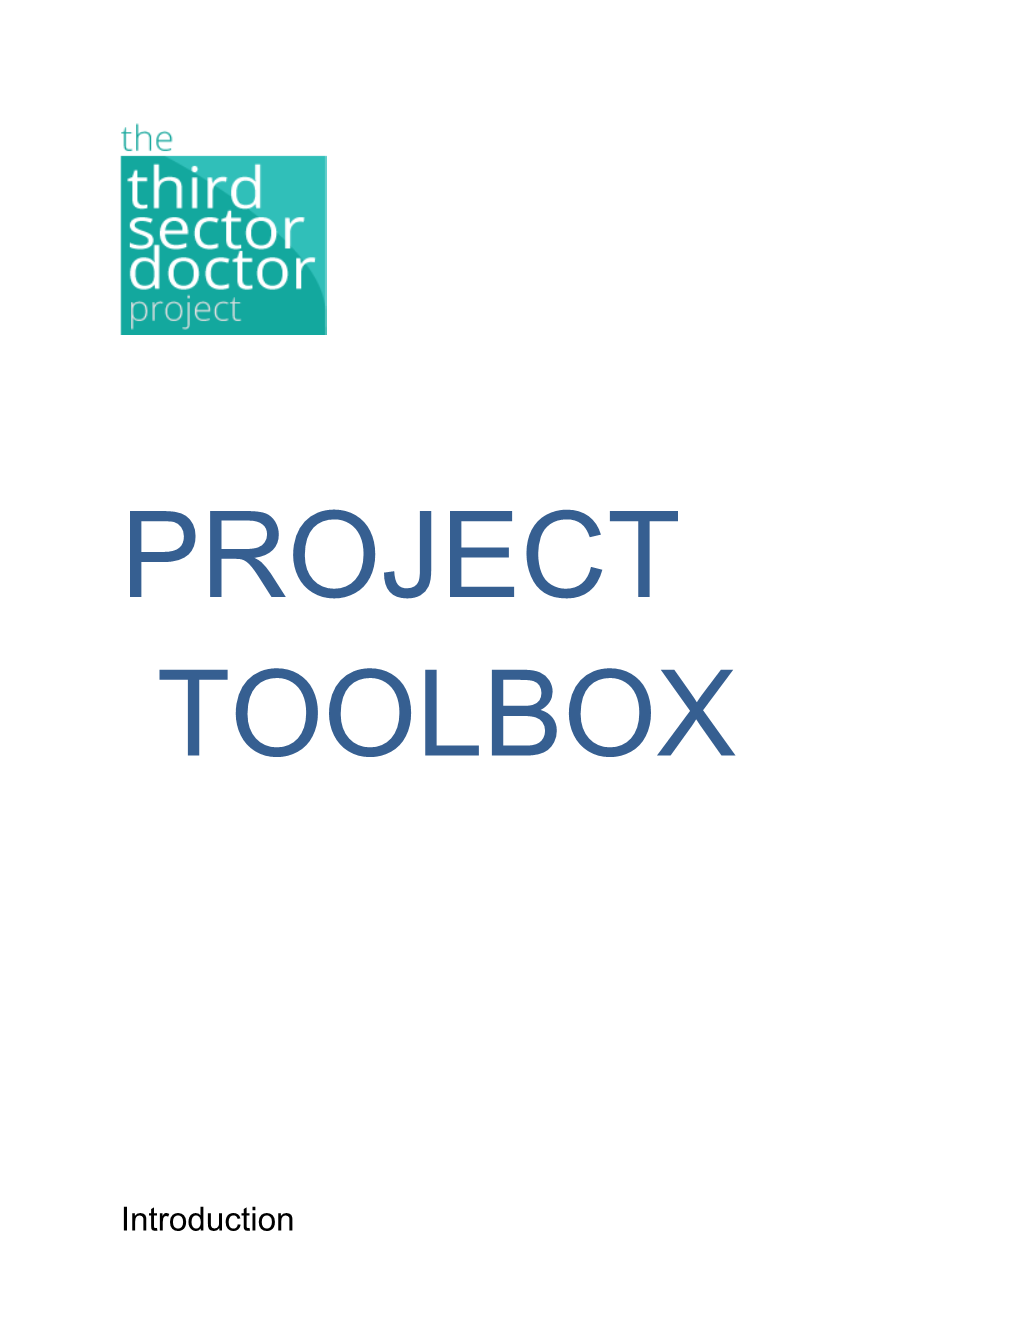 Project Toolbox